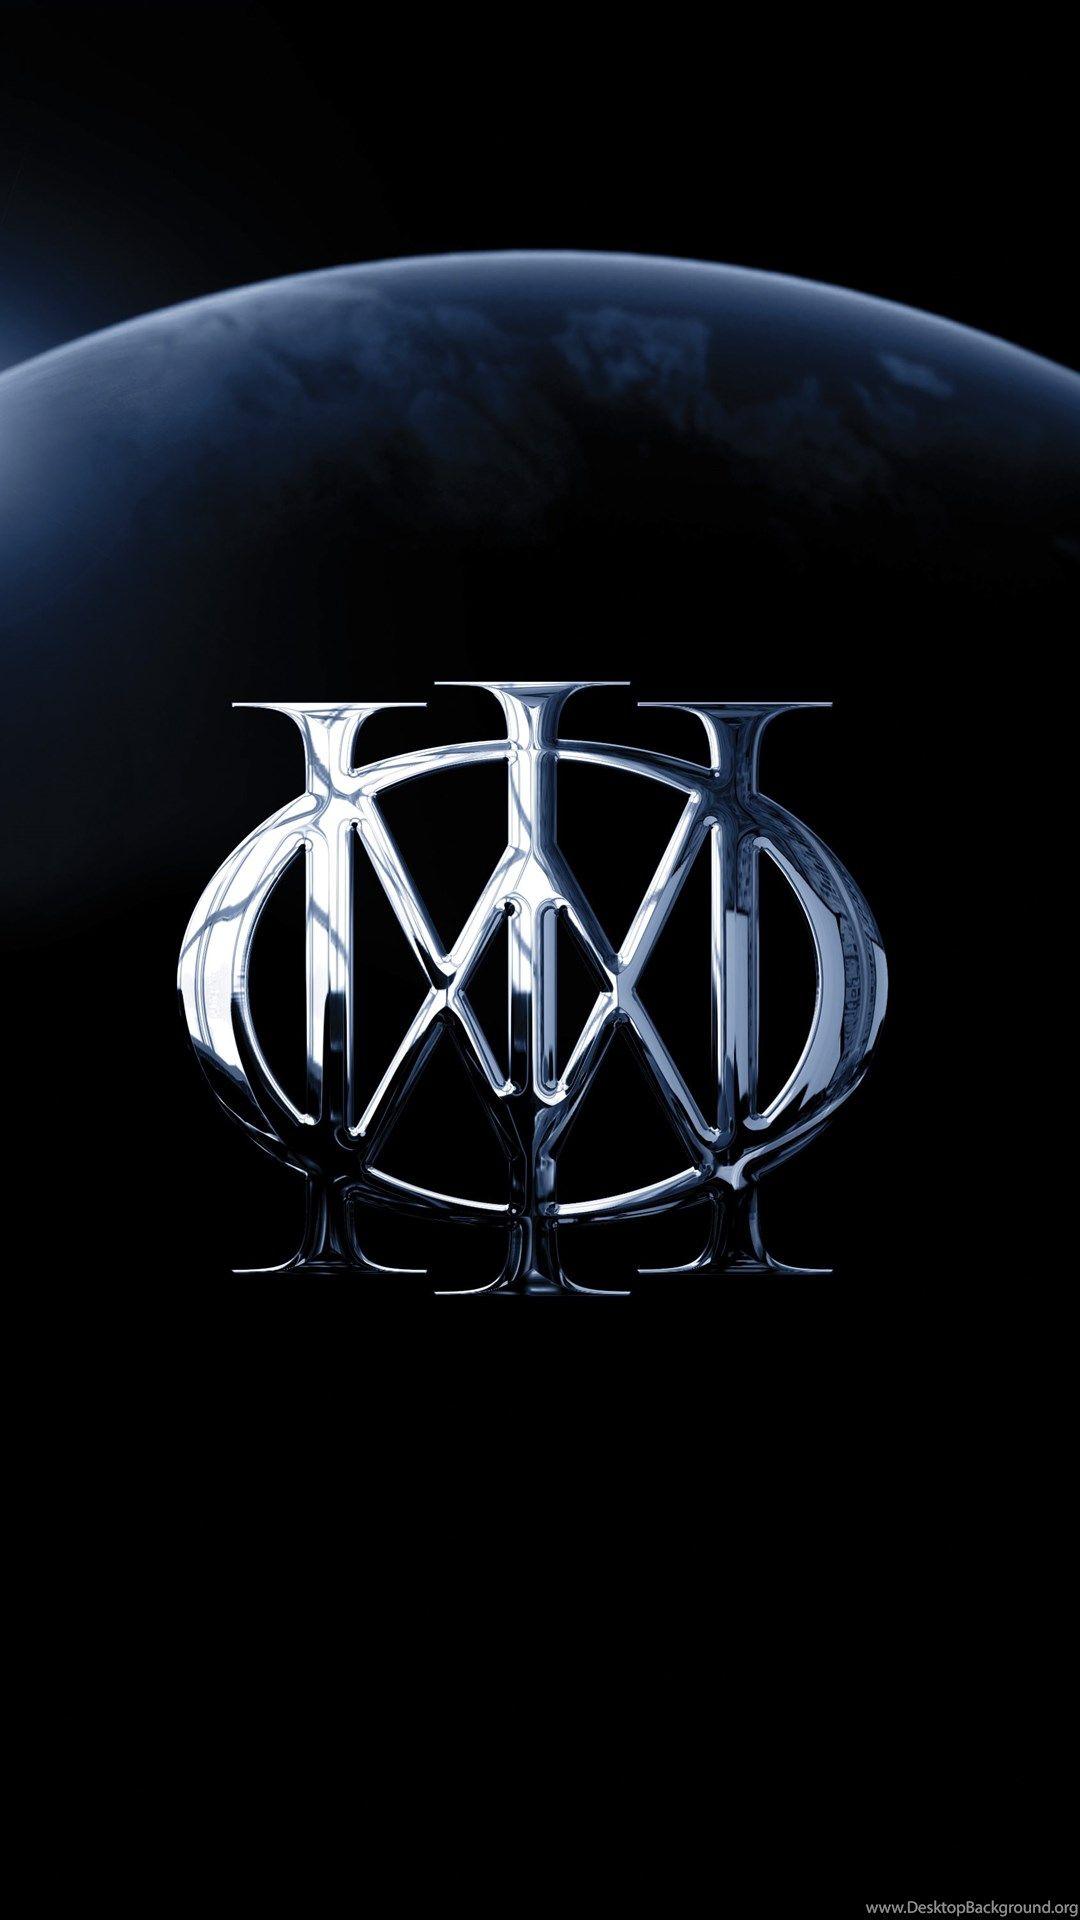 HD Dream Theater Wallpaper And Photo Desktop Background